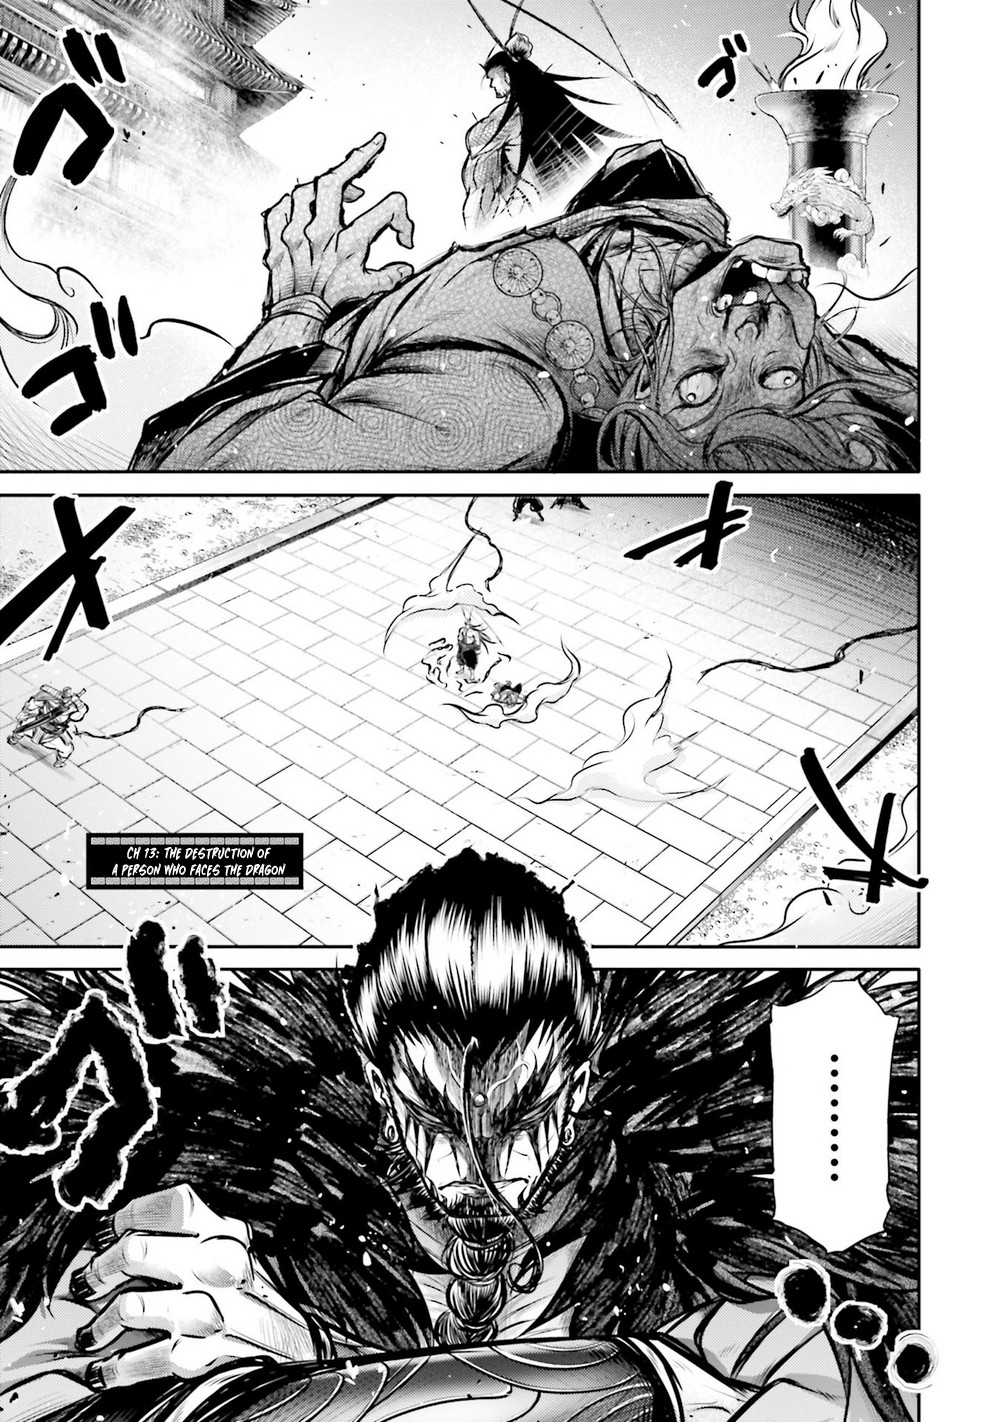 Shuumatsu No Valkyrie: The Legend Of Lu Bu Fengxian Chapter 13: The Destruction Of A Person Who Faces The Dragon. - Picture 2